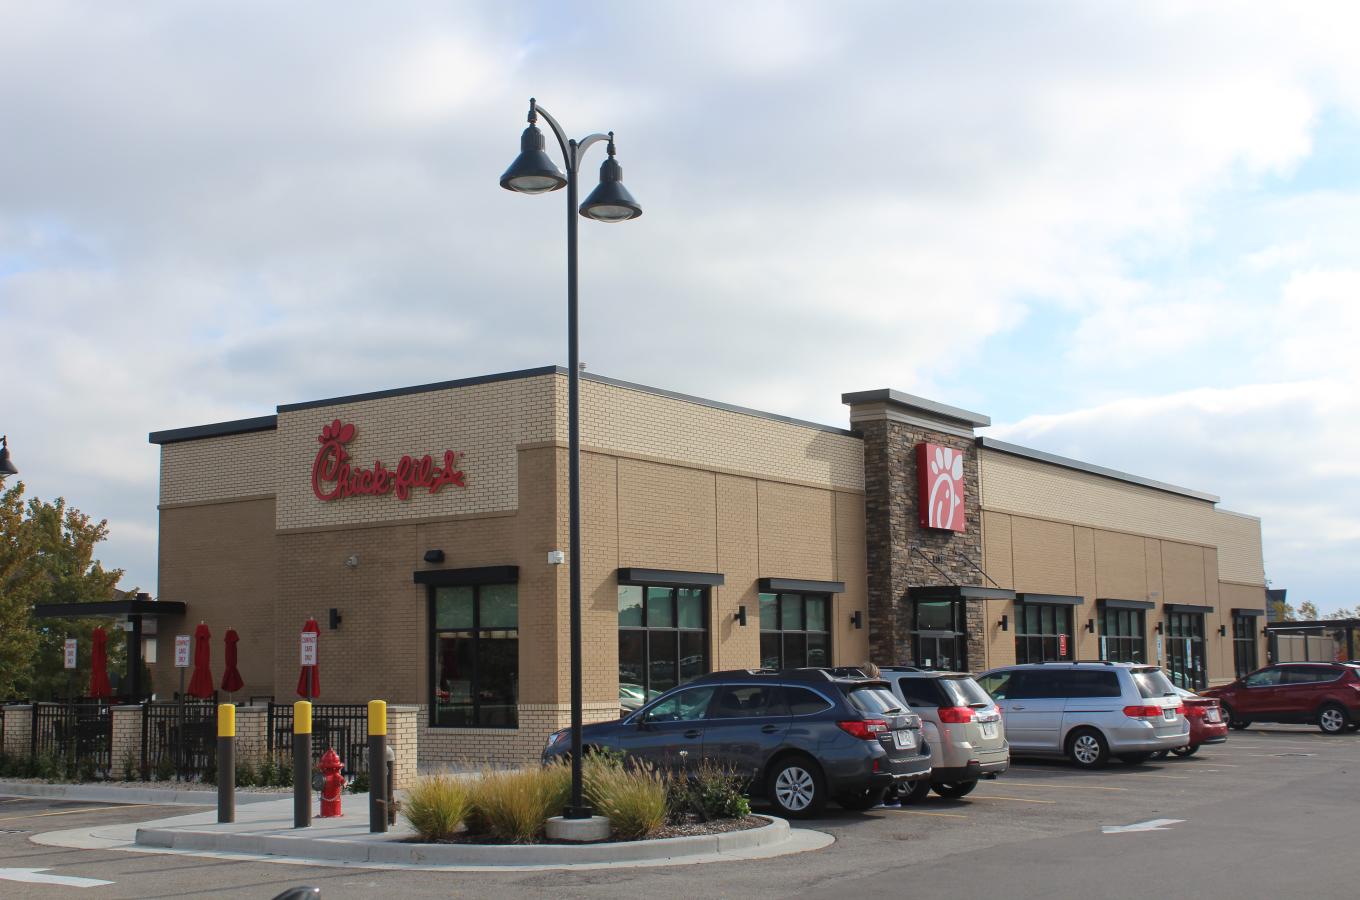 2019 SH Chick-fil-A Storefront